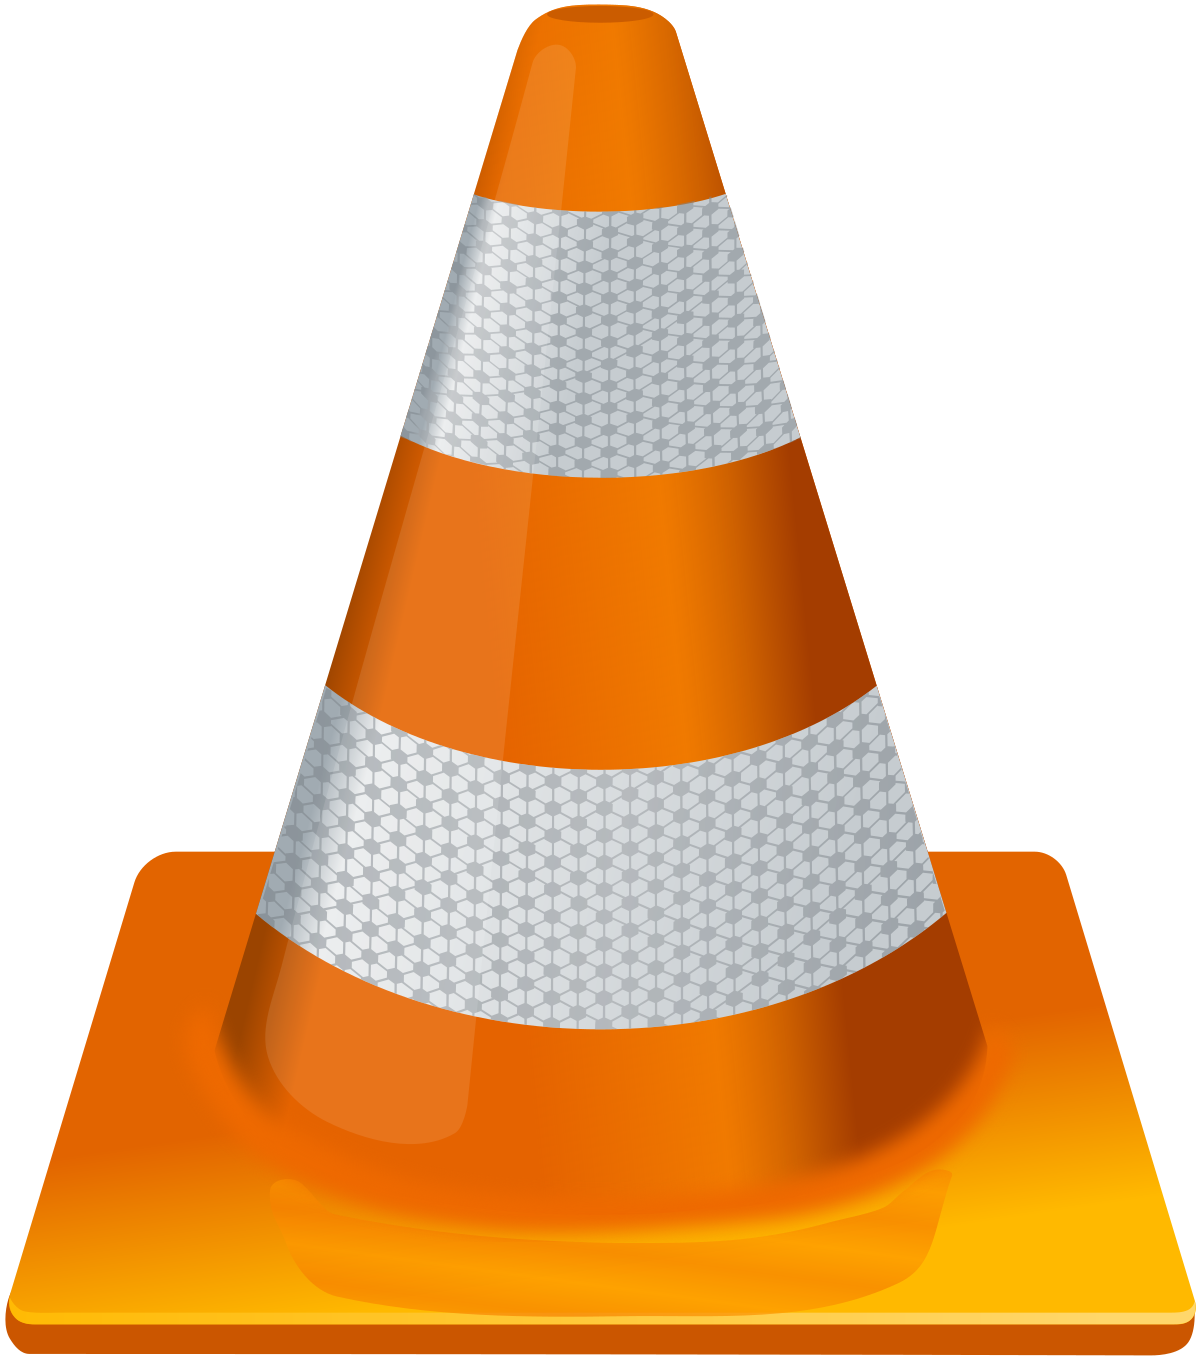 Vlc for mac free download